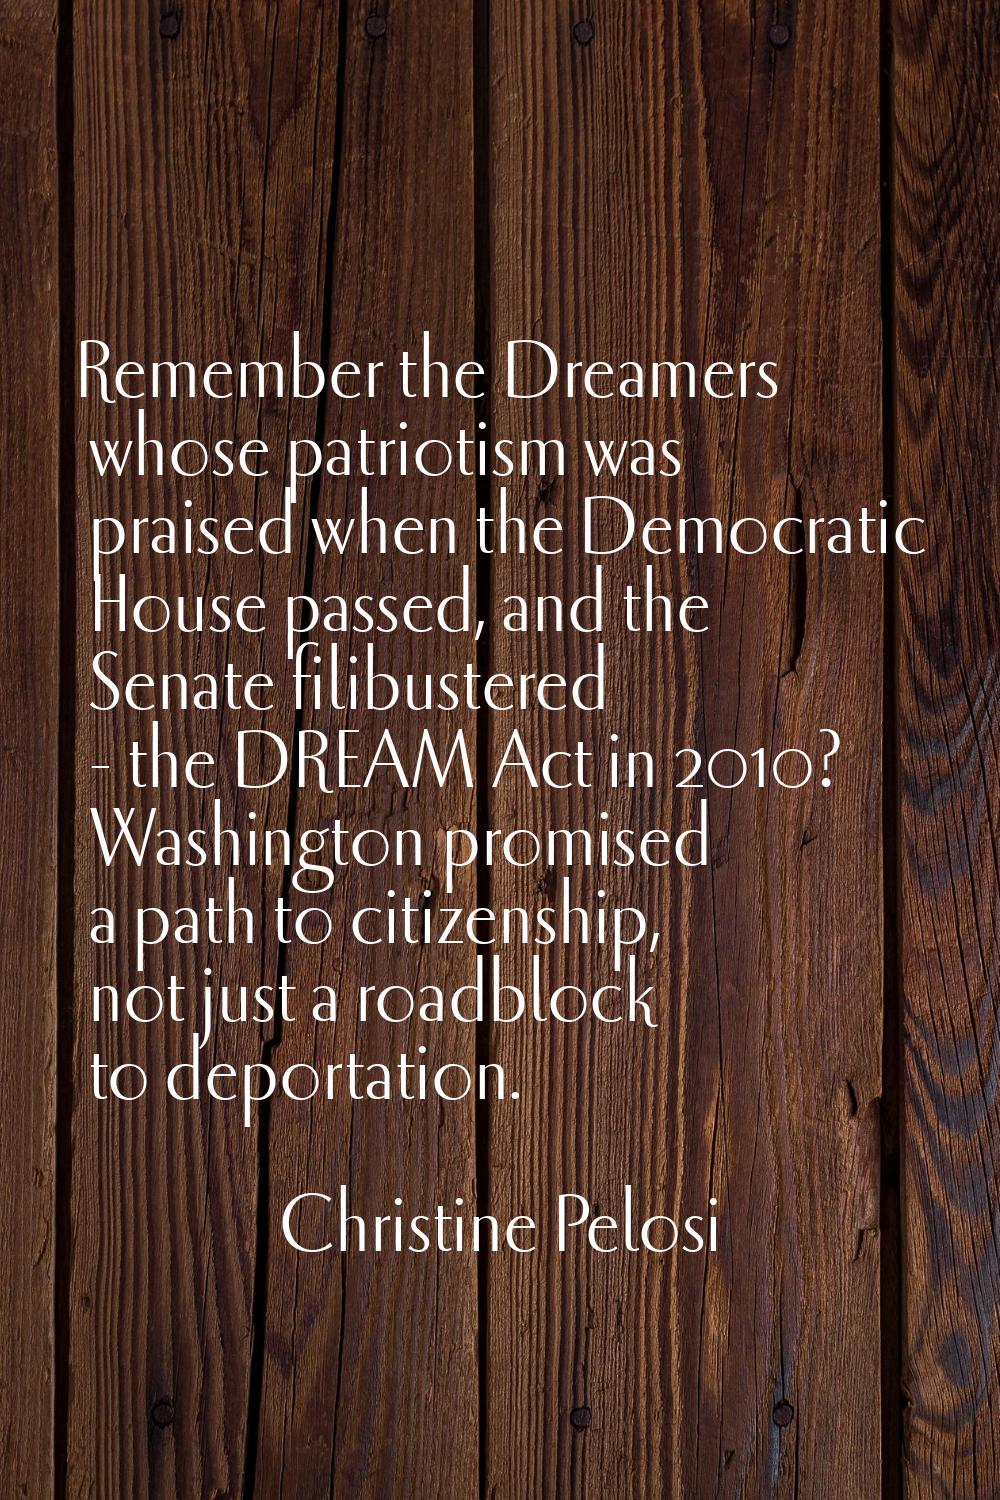 Remember the Dreamers whose patriotism was praised when the Democratic House passed, and the Senate